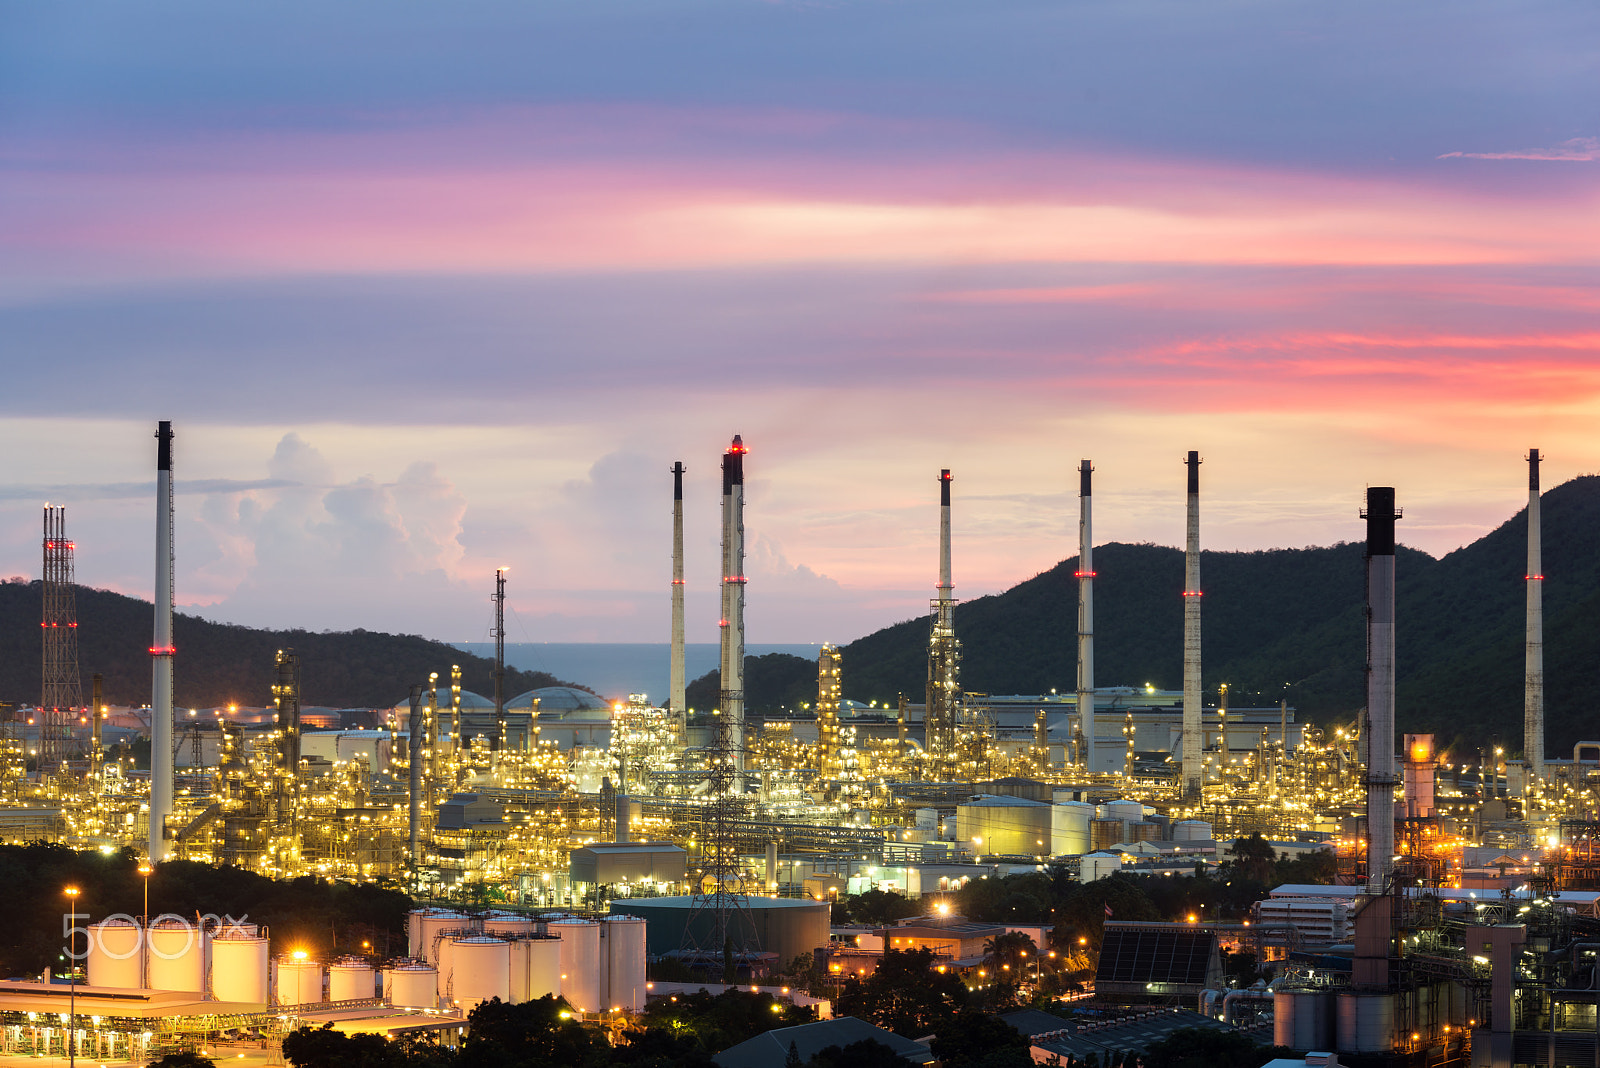 Nikon D800 sample photo. Oil refinery industry at night in chonburi, thailand. photography